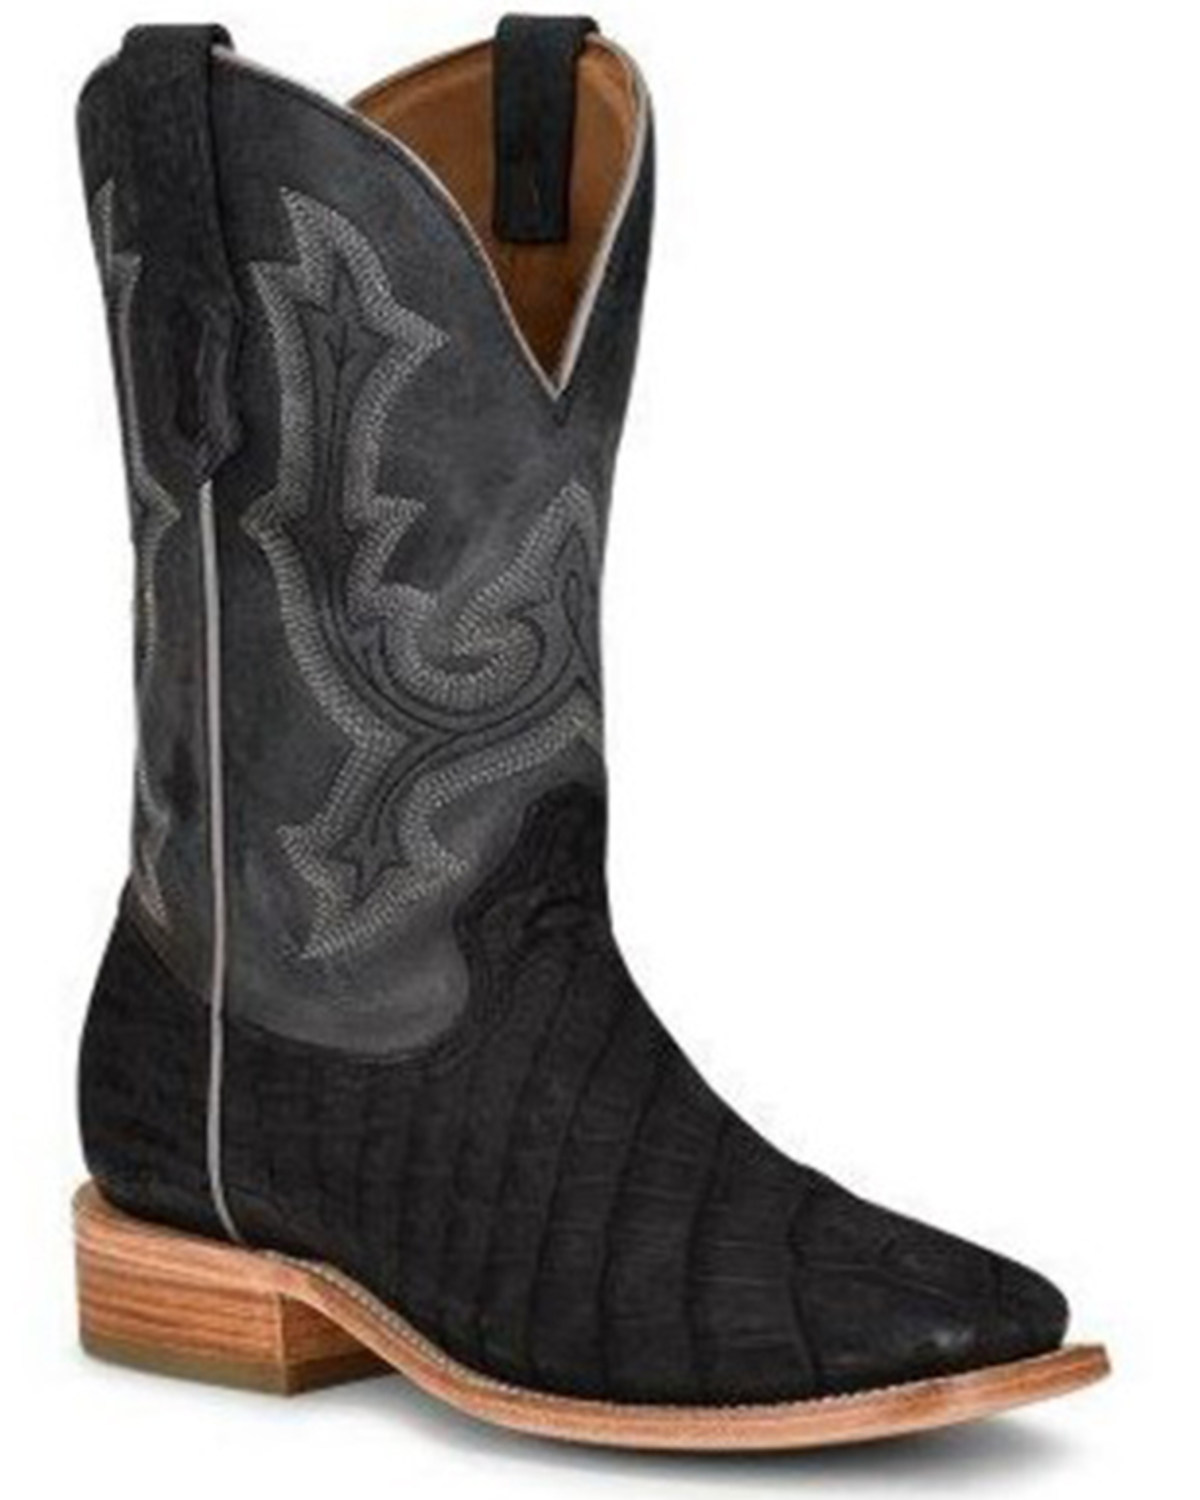 Corral Men's Exotic Alligator Western Boots - Broad Square Toe